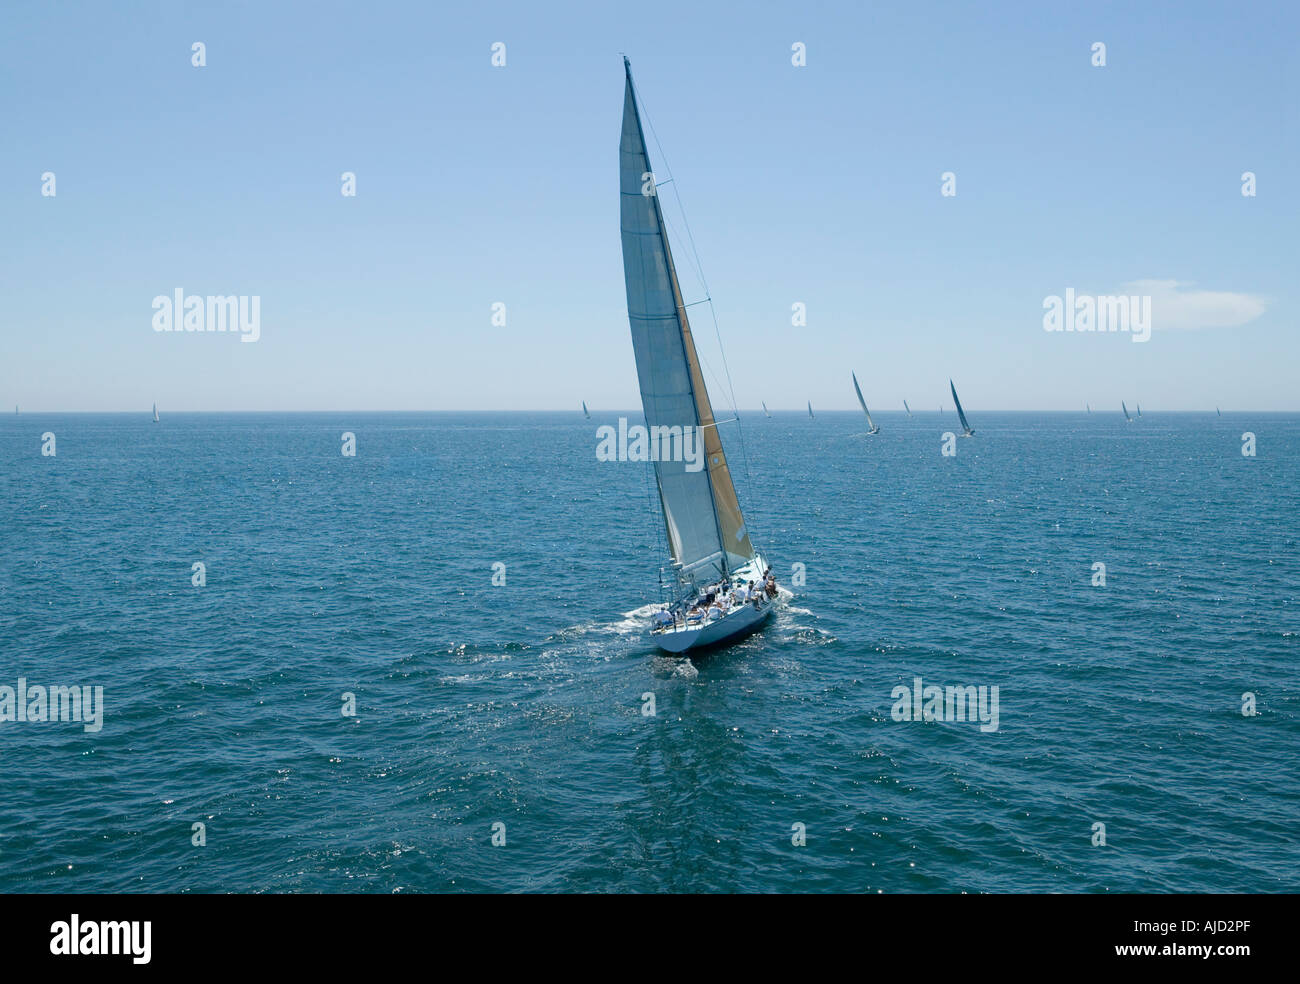 Sailboat racing on Ocean, back view Stock Photo